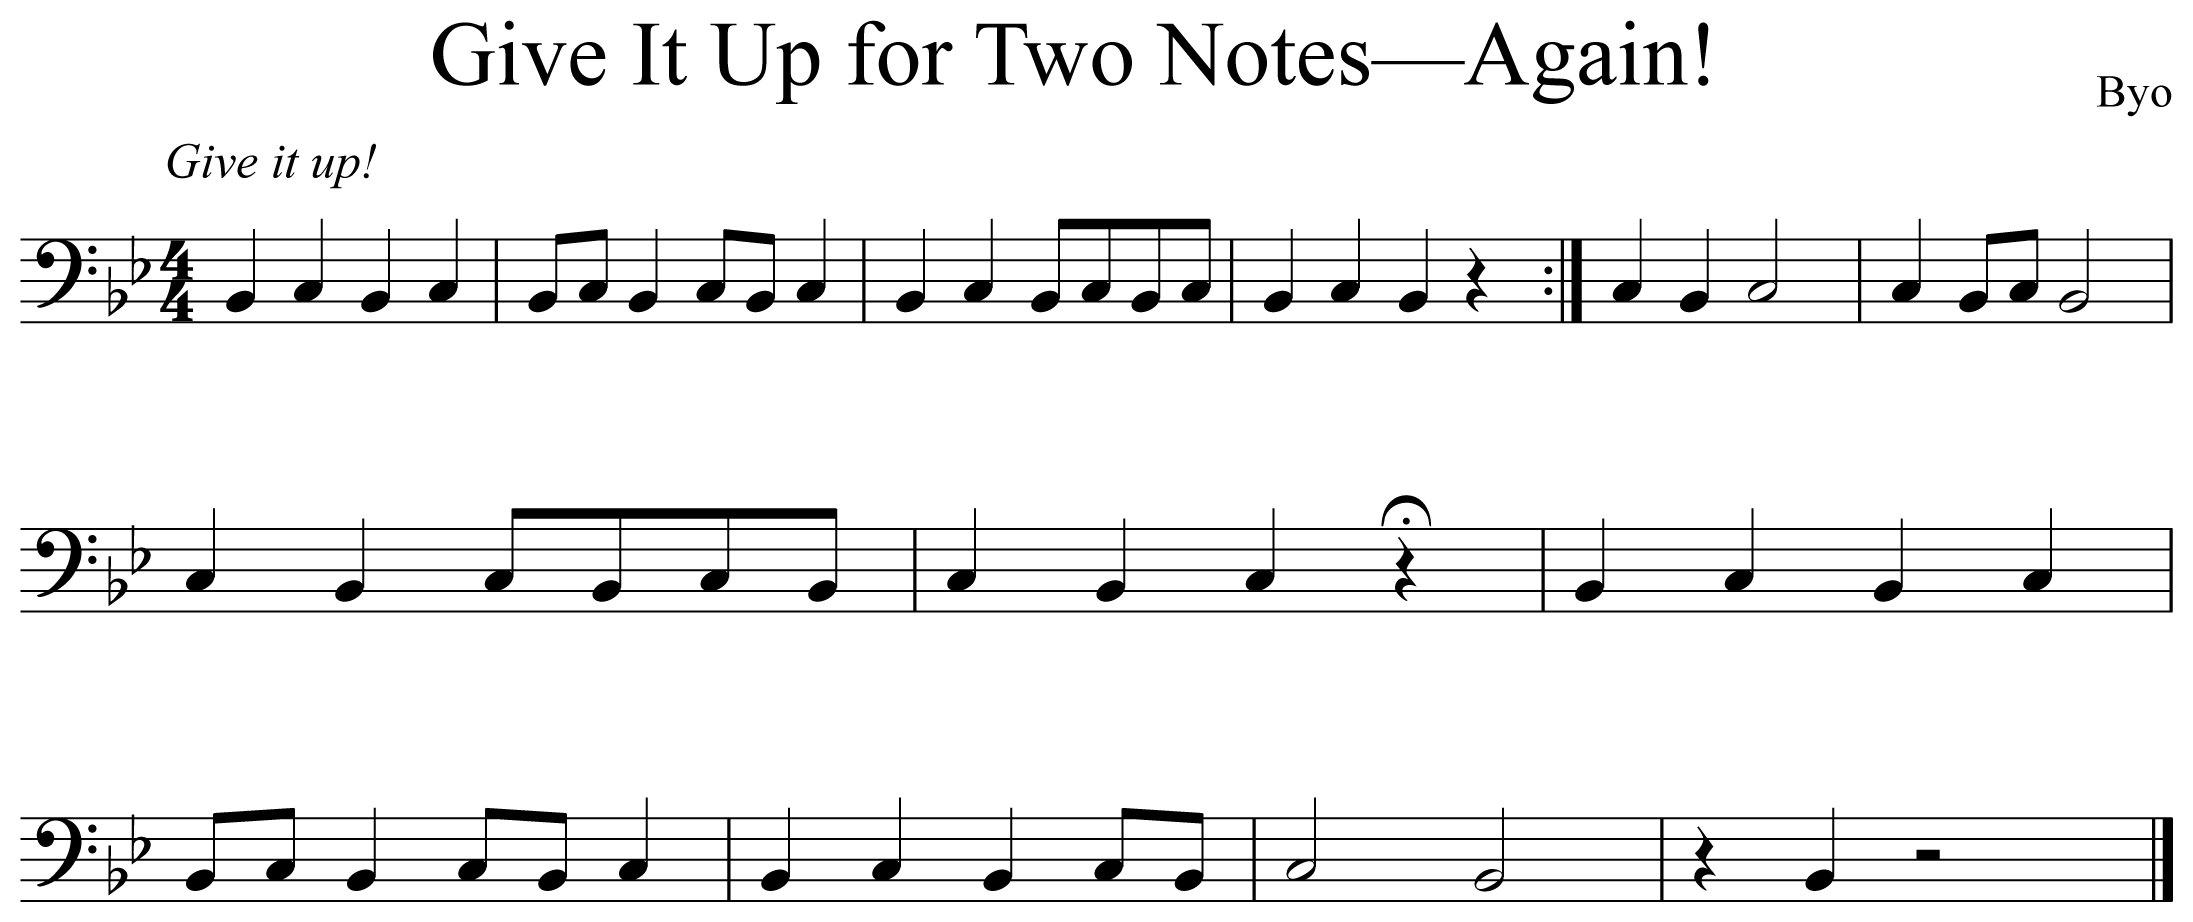 Give it up for Two Notes Yet Again Notation Trombone